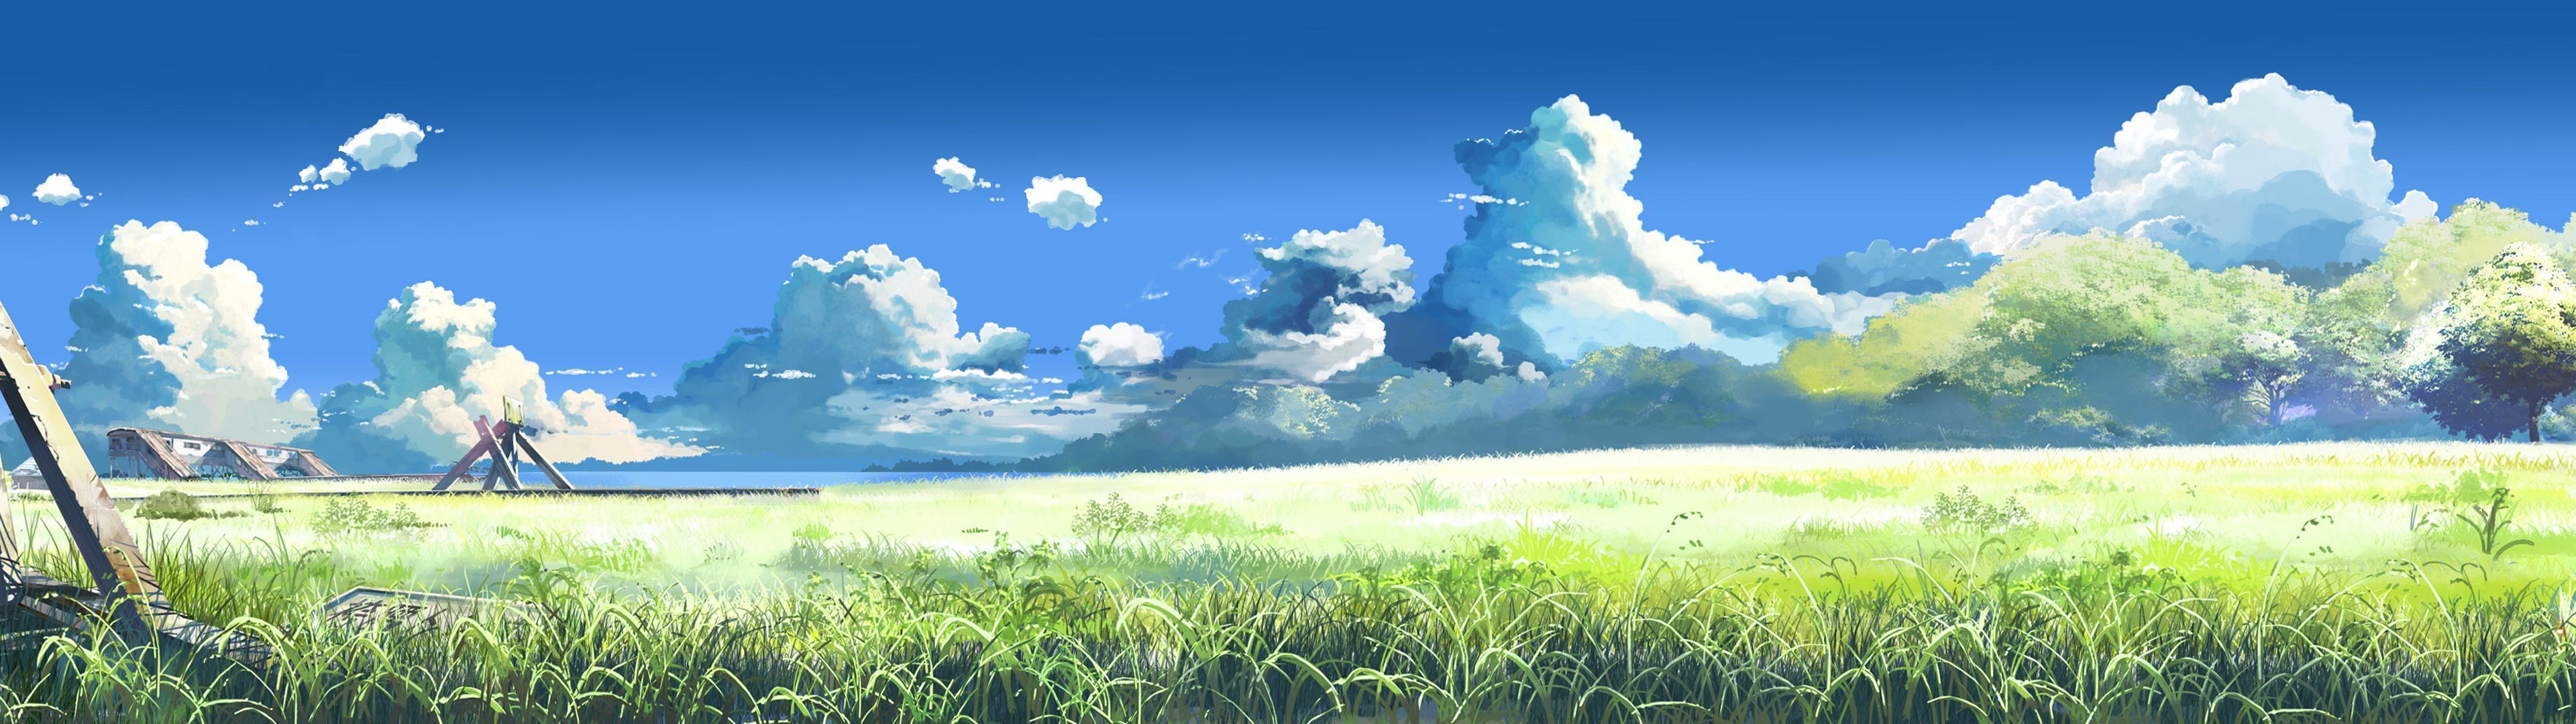 Anime 3840X1080 Wallpapers - Wallpaper Cave